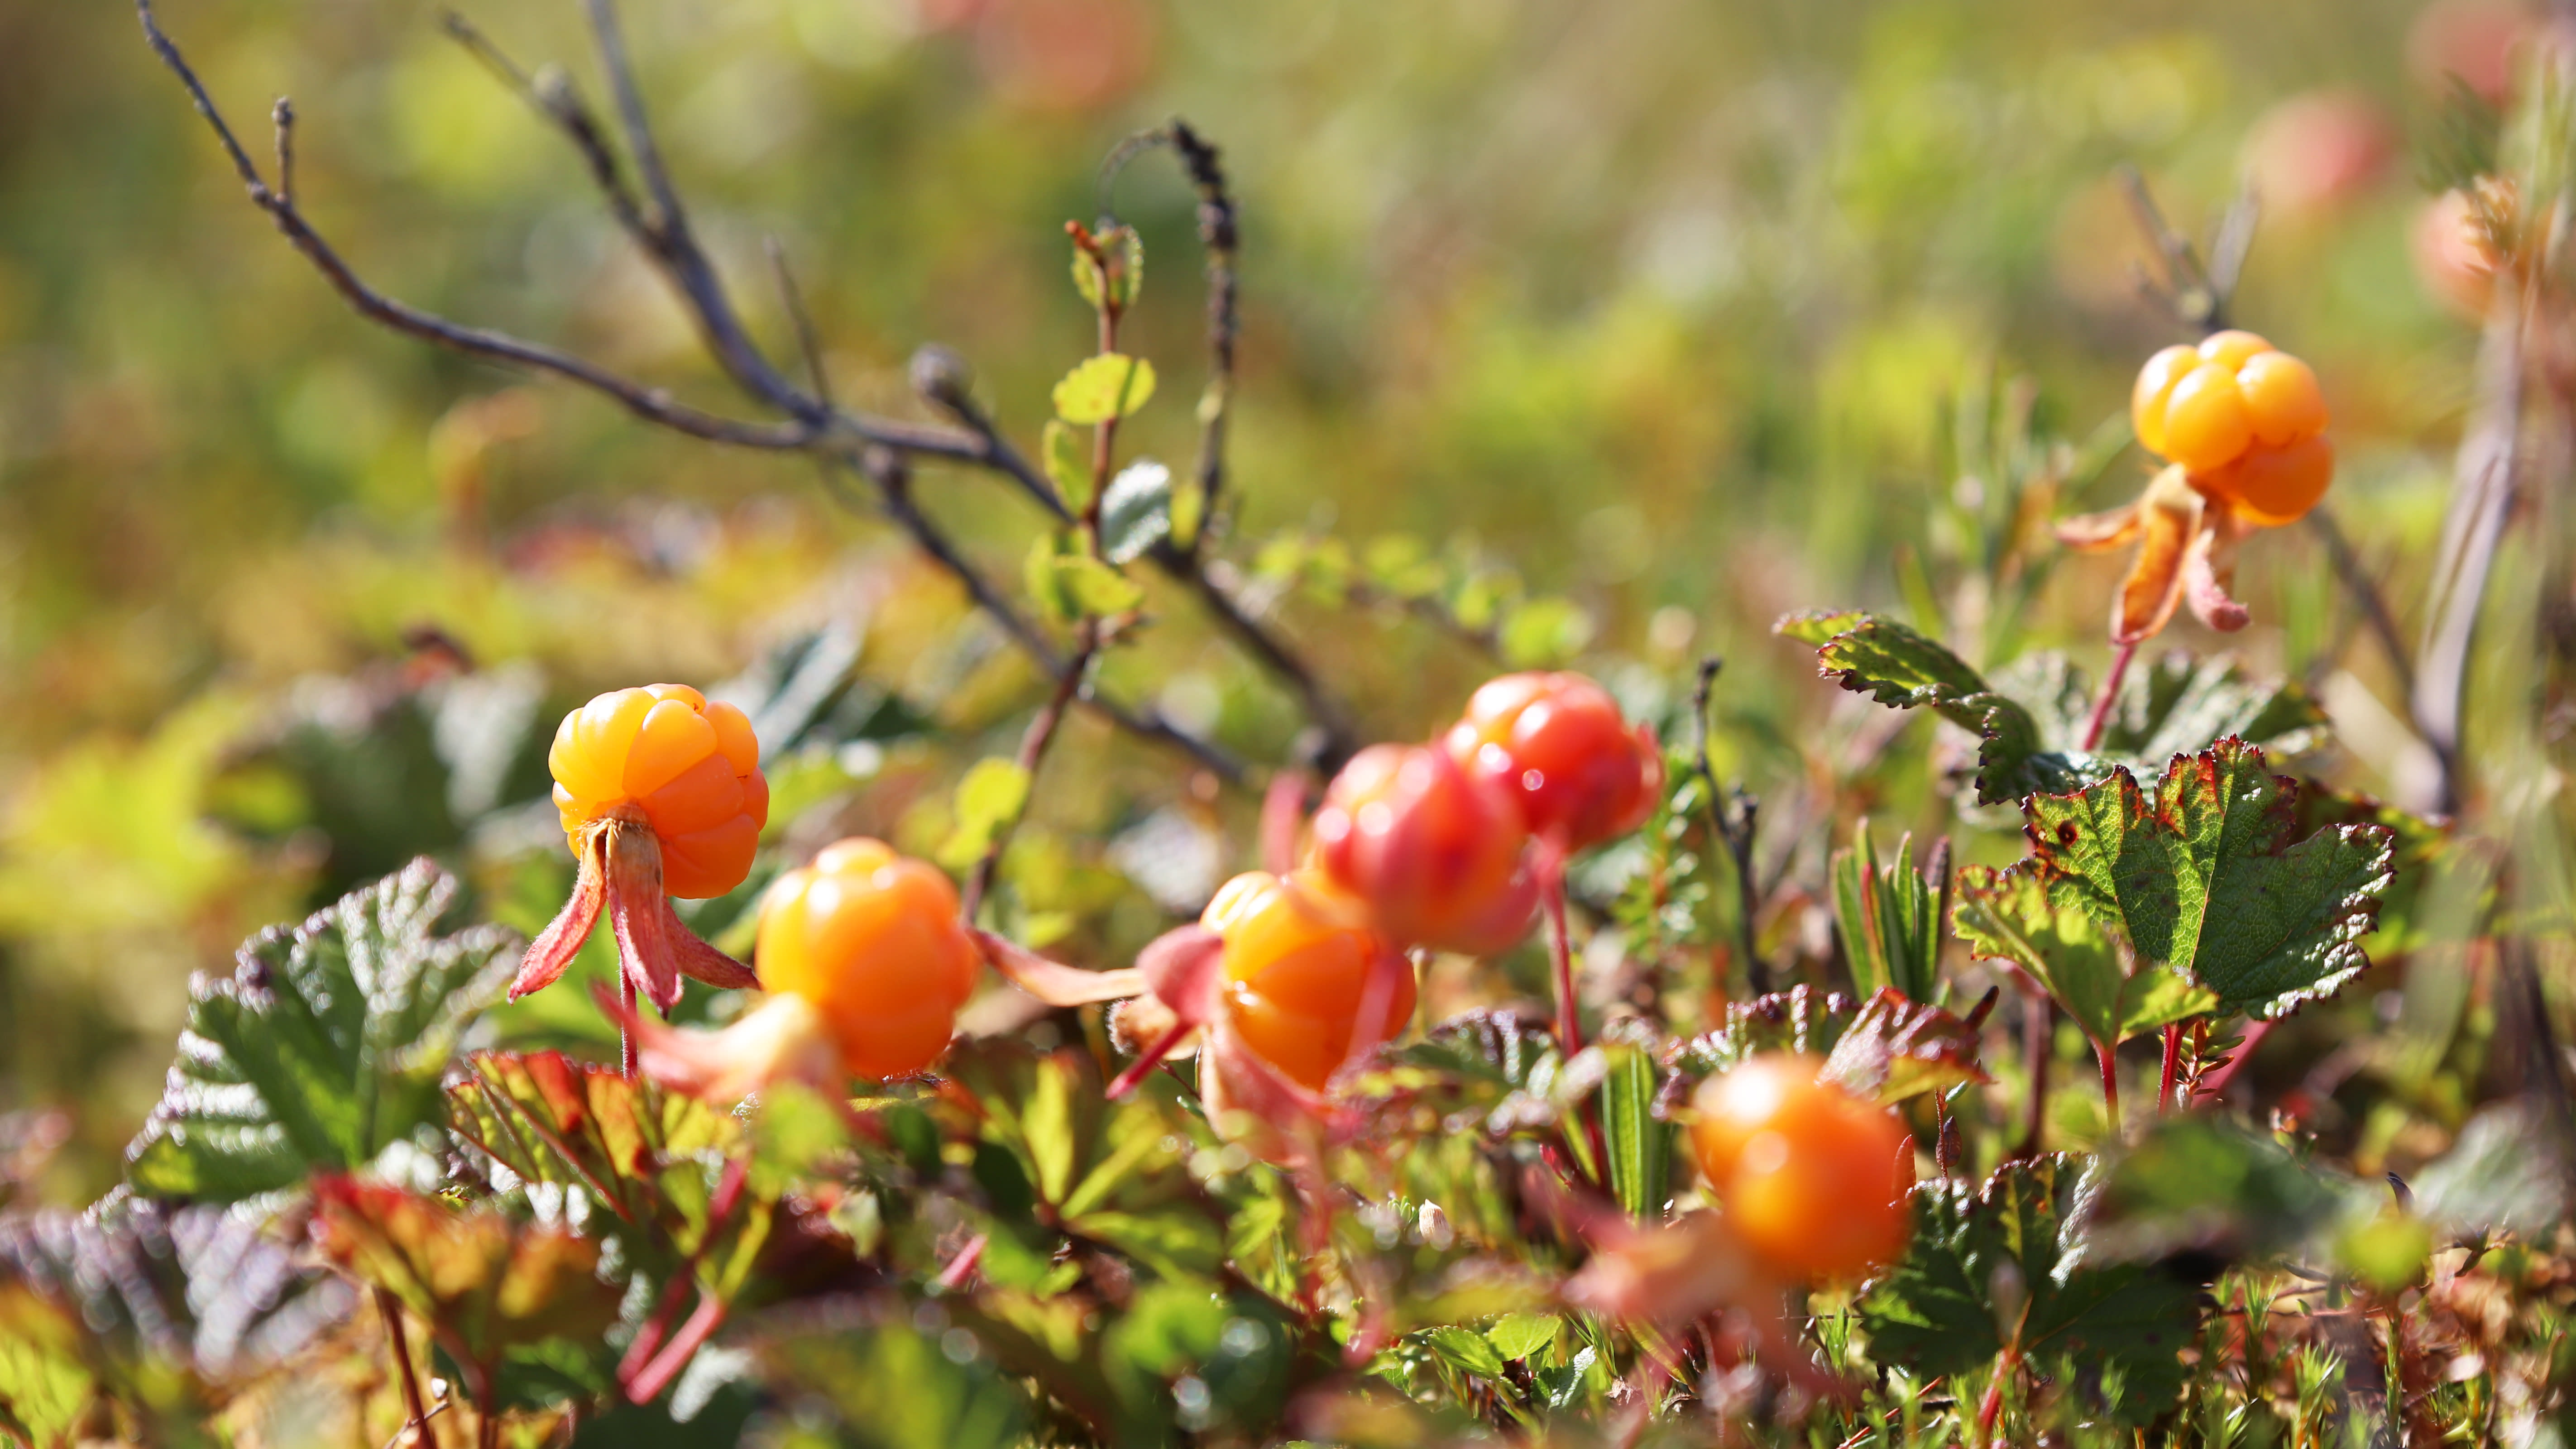 Police: More than 100 cases of berry pickers getting lost in Finnish forests this summer